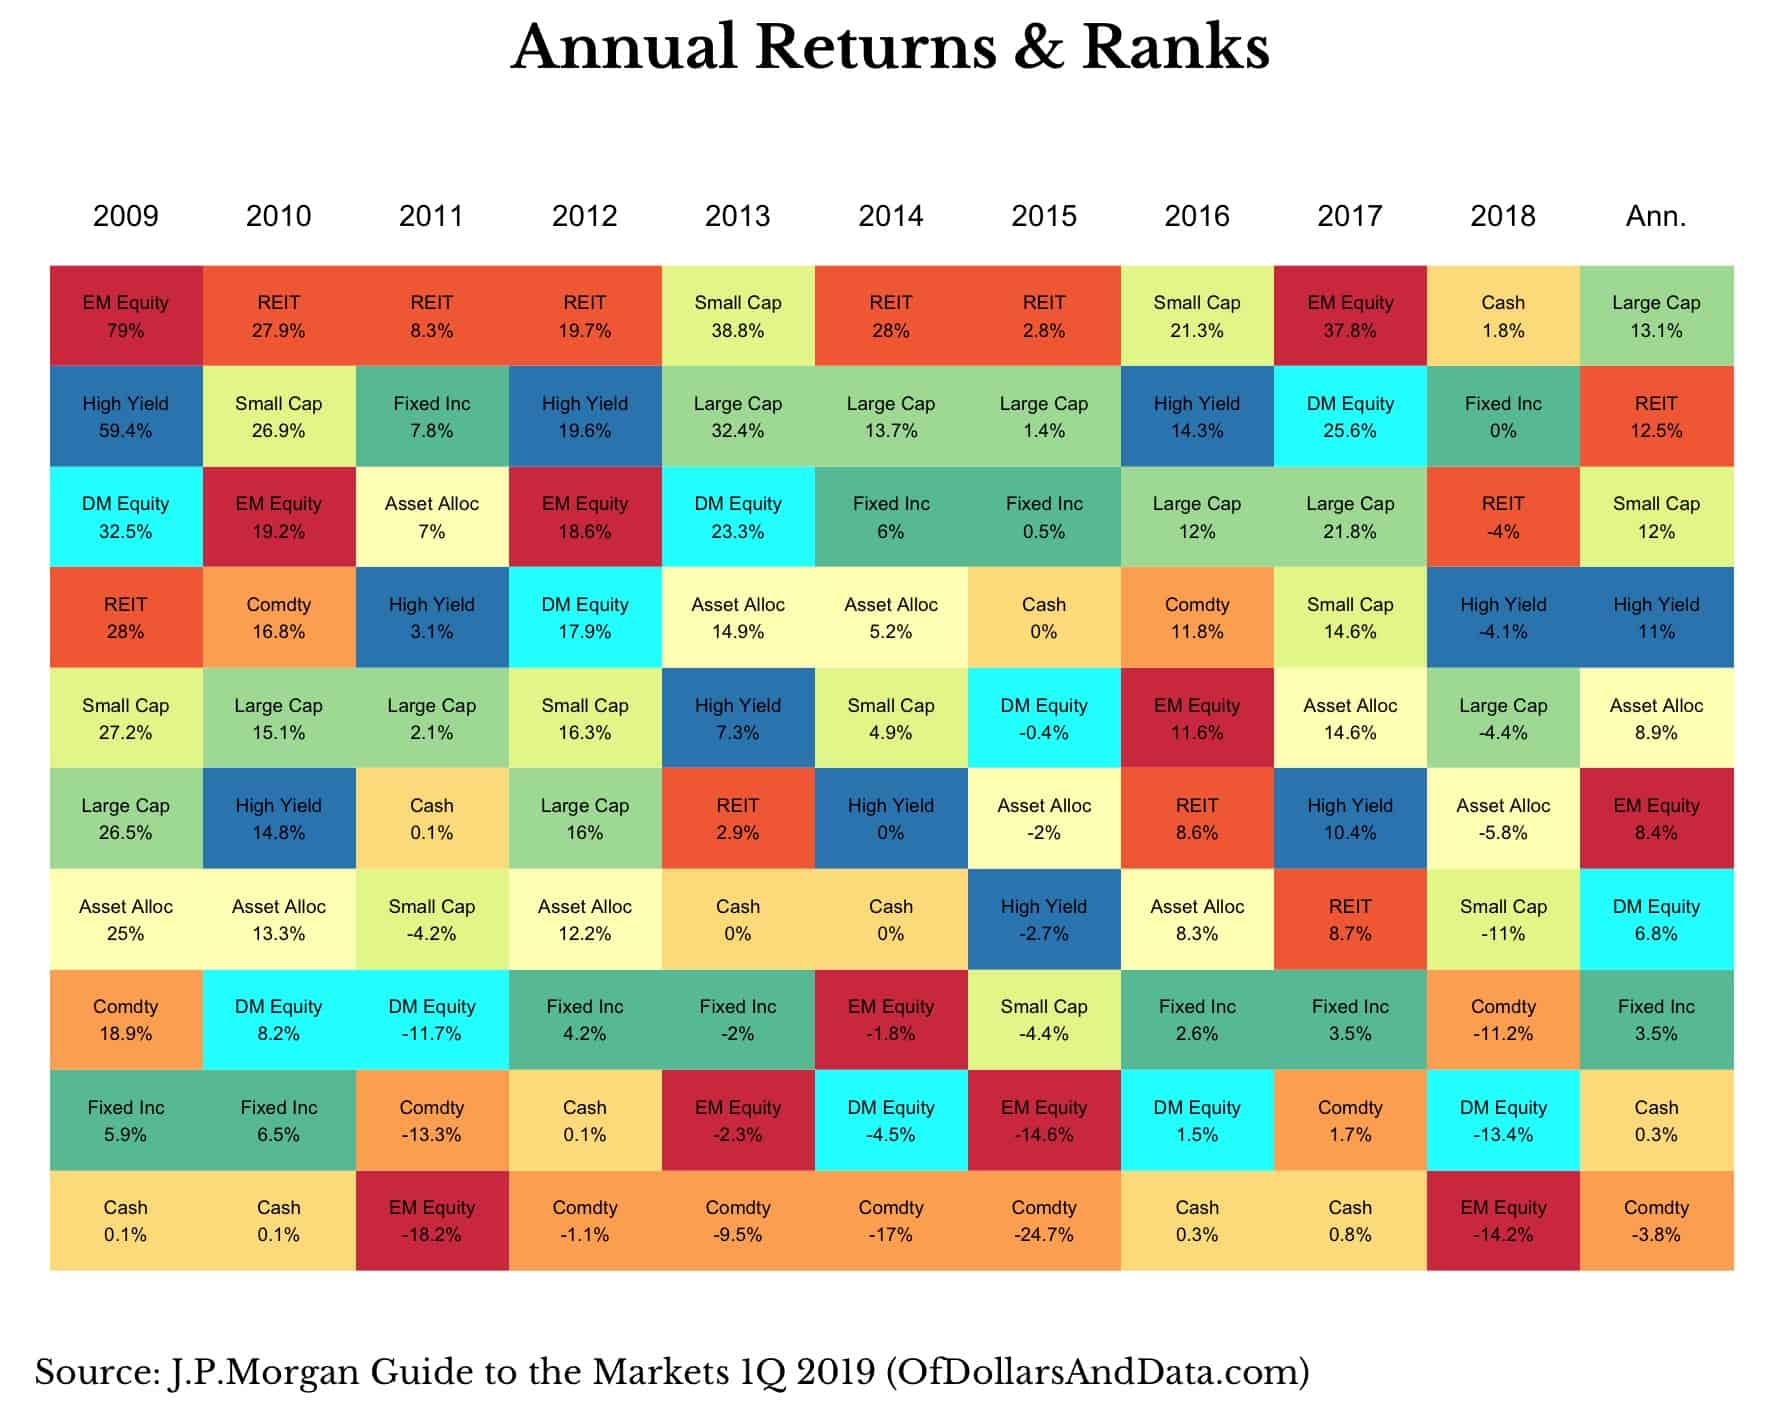 Chart of annual returns and ranks for various asset classes from 2009 to 2018.